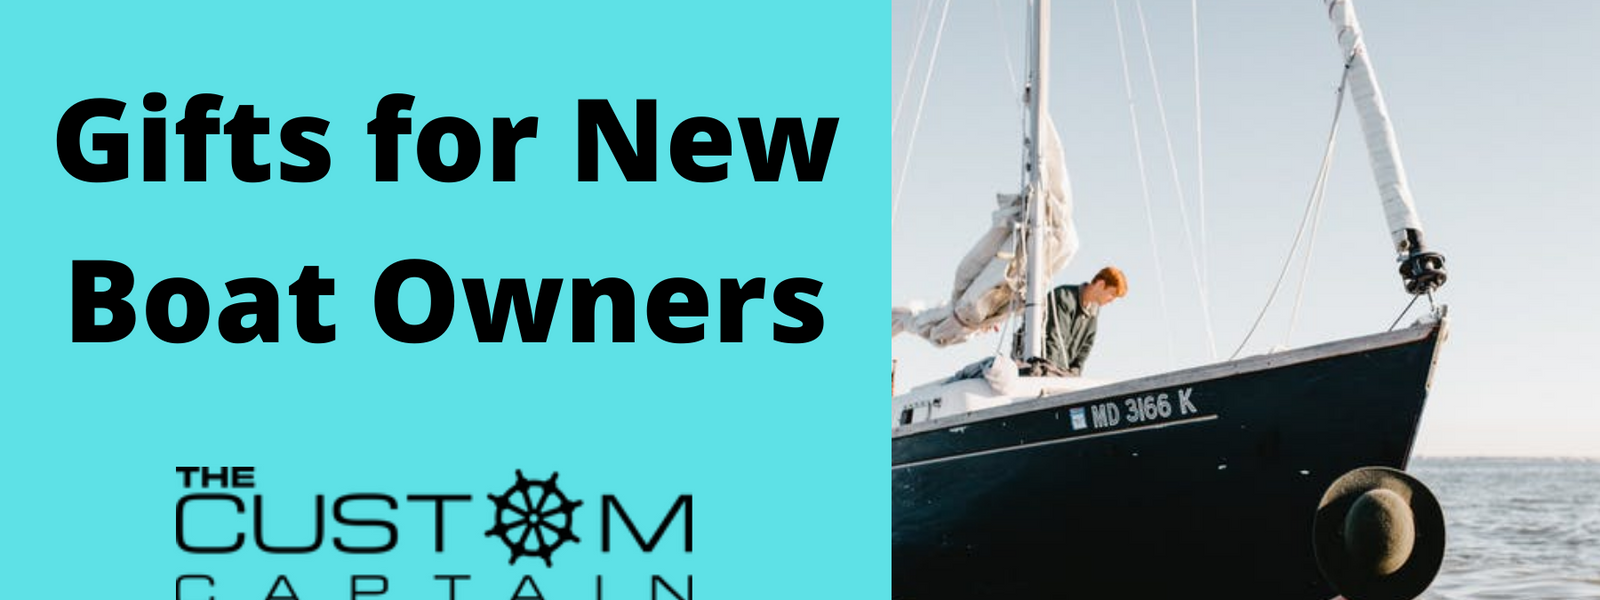 Gifts for New Boat Owners